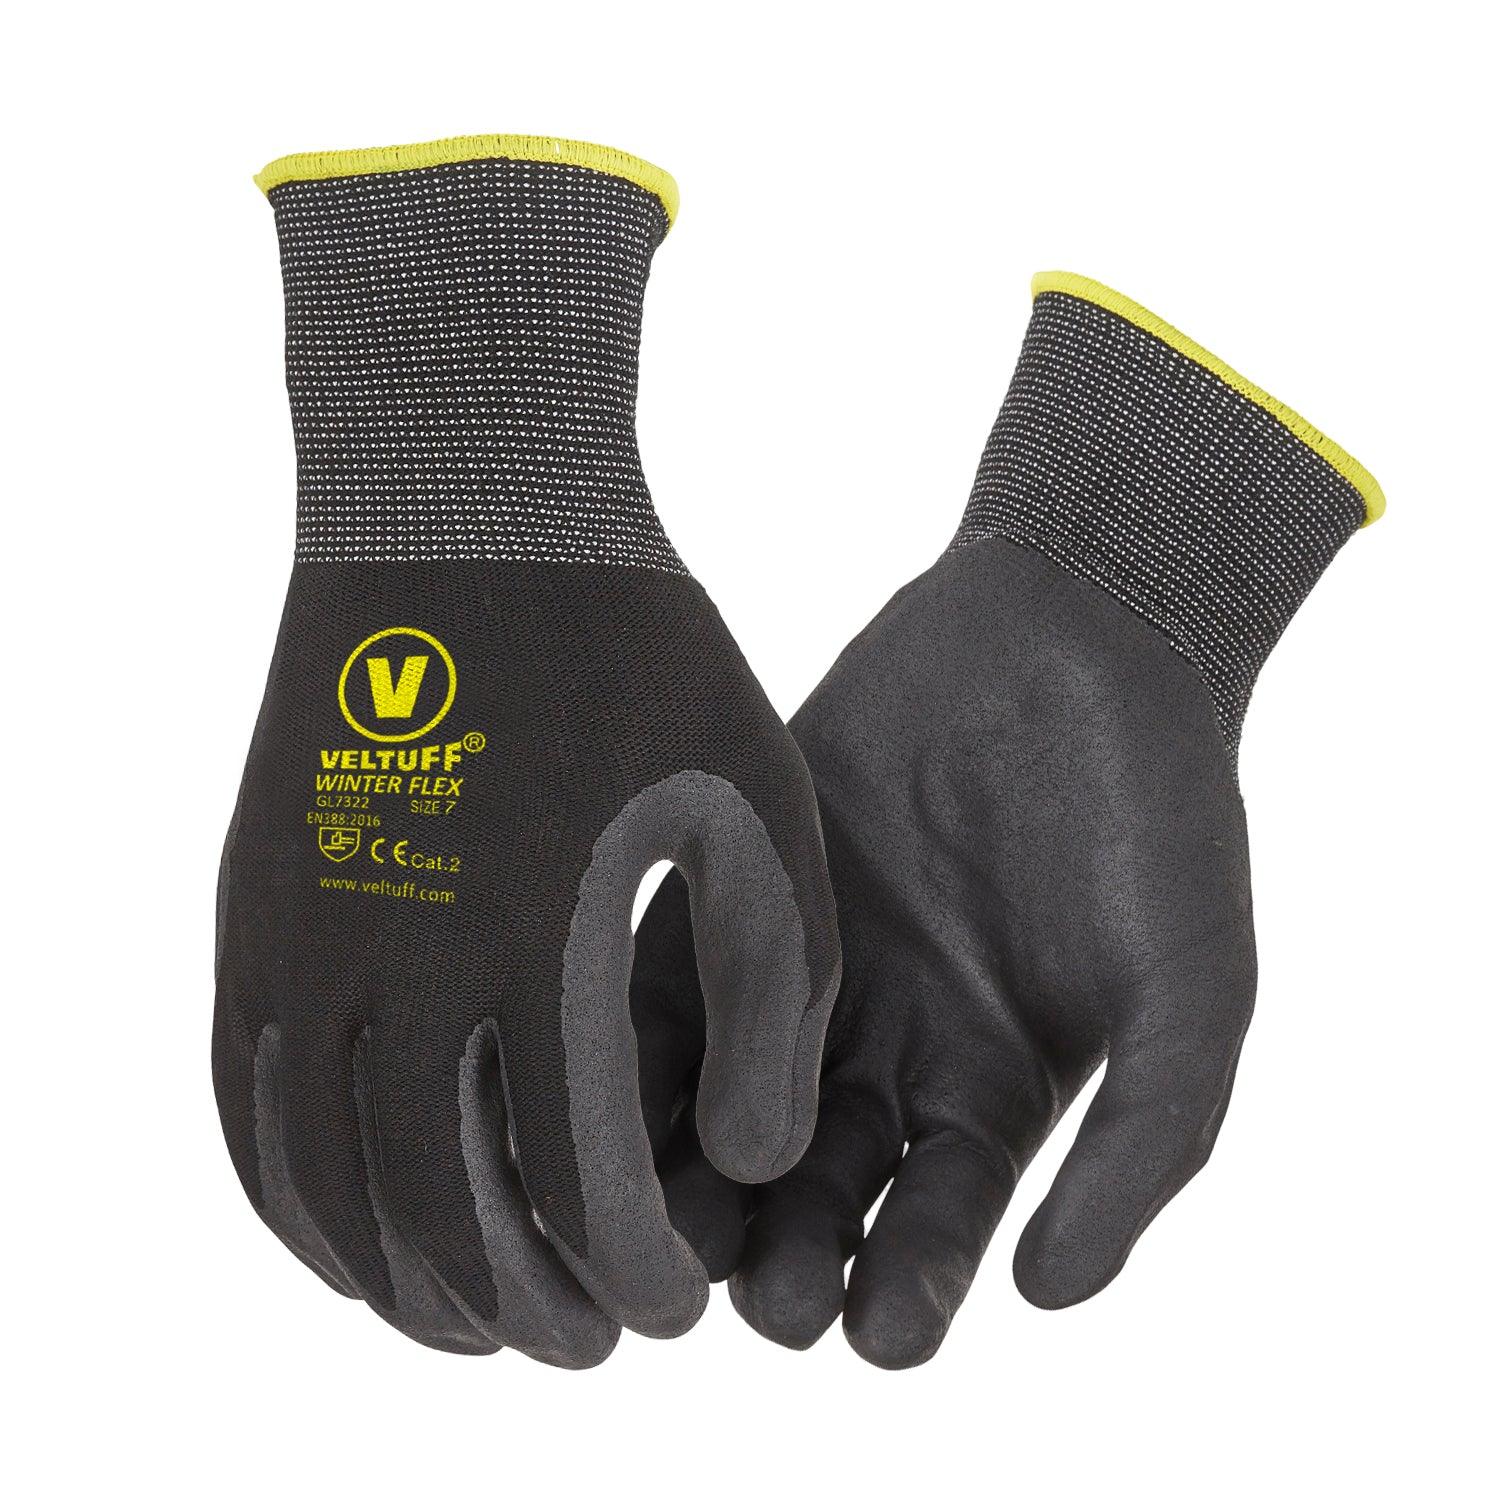 Thor termo med greb | VELTUFF® Real Workwear